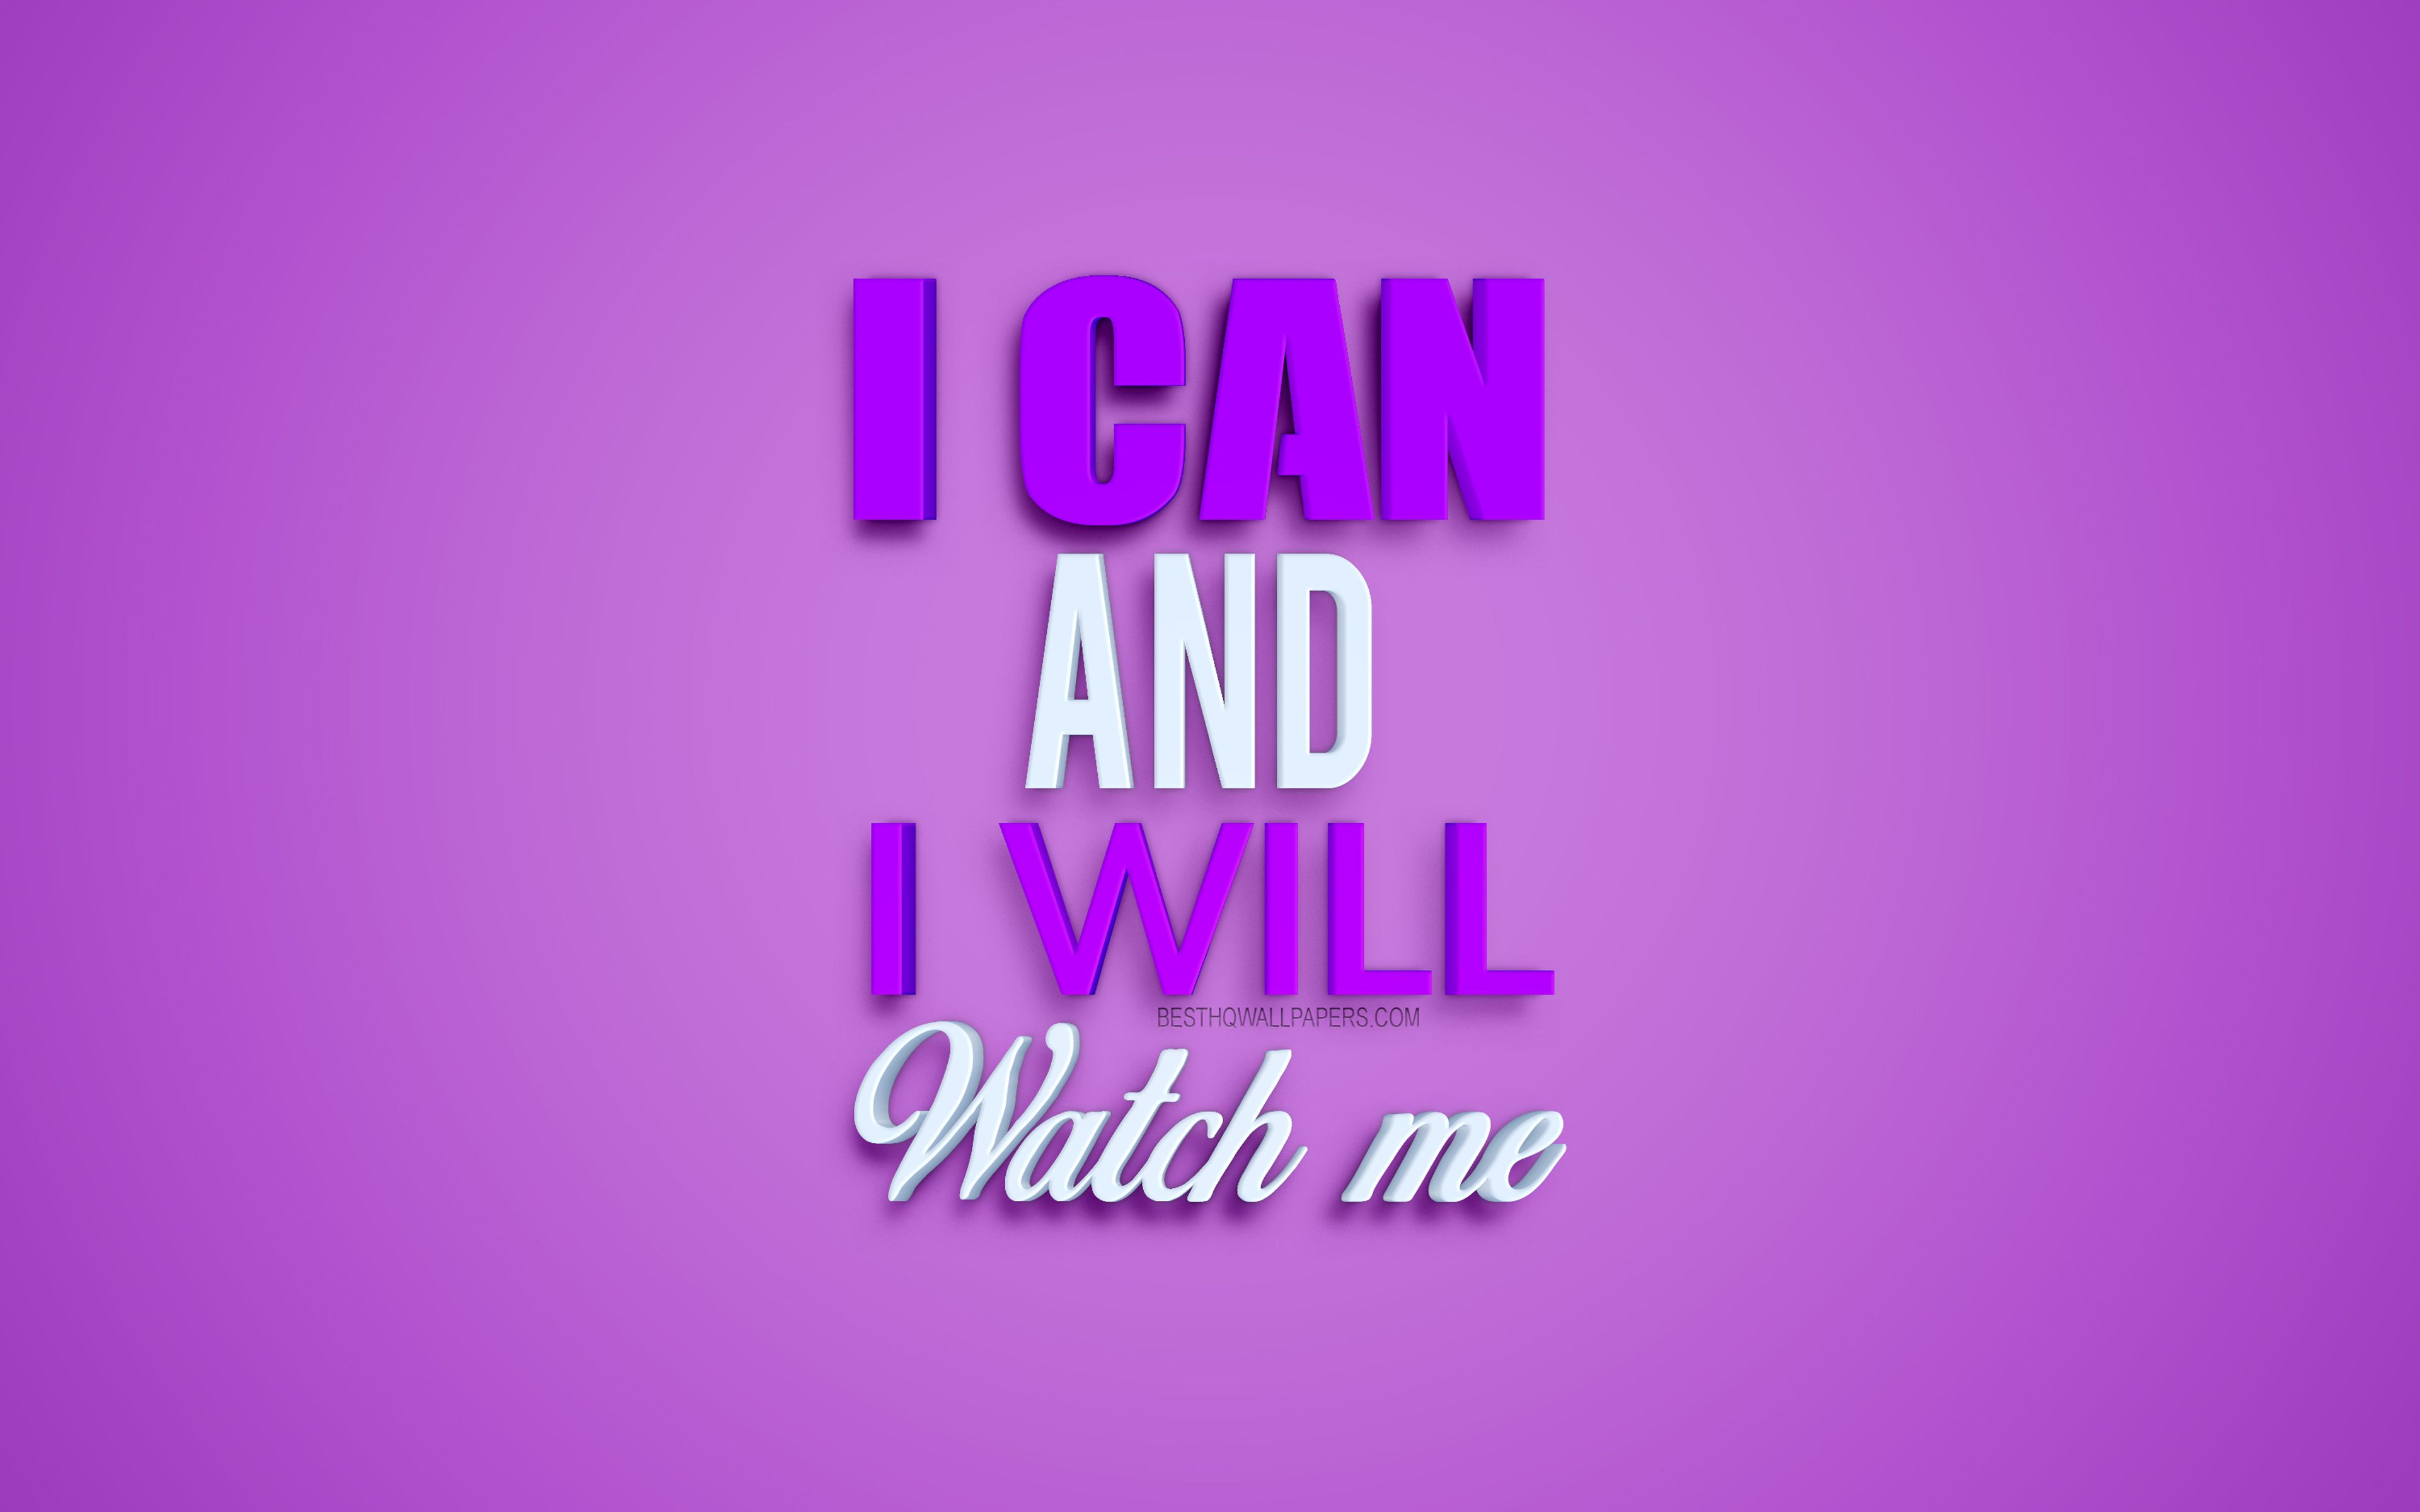 Download wallpaper I can and I will watch me, motivation quotes